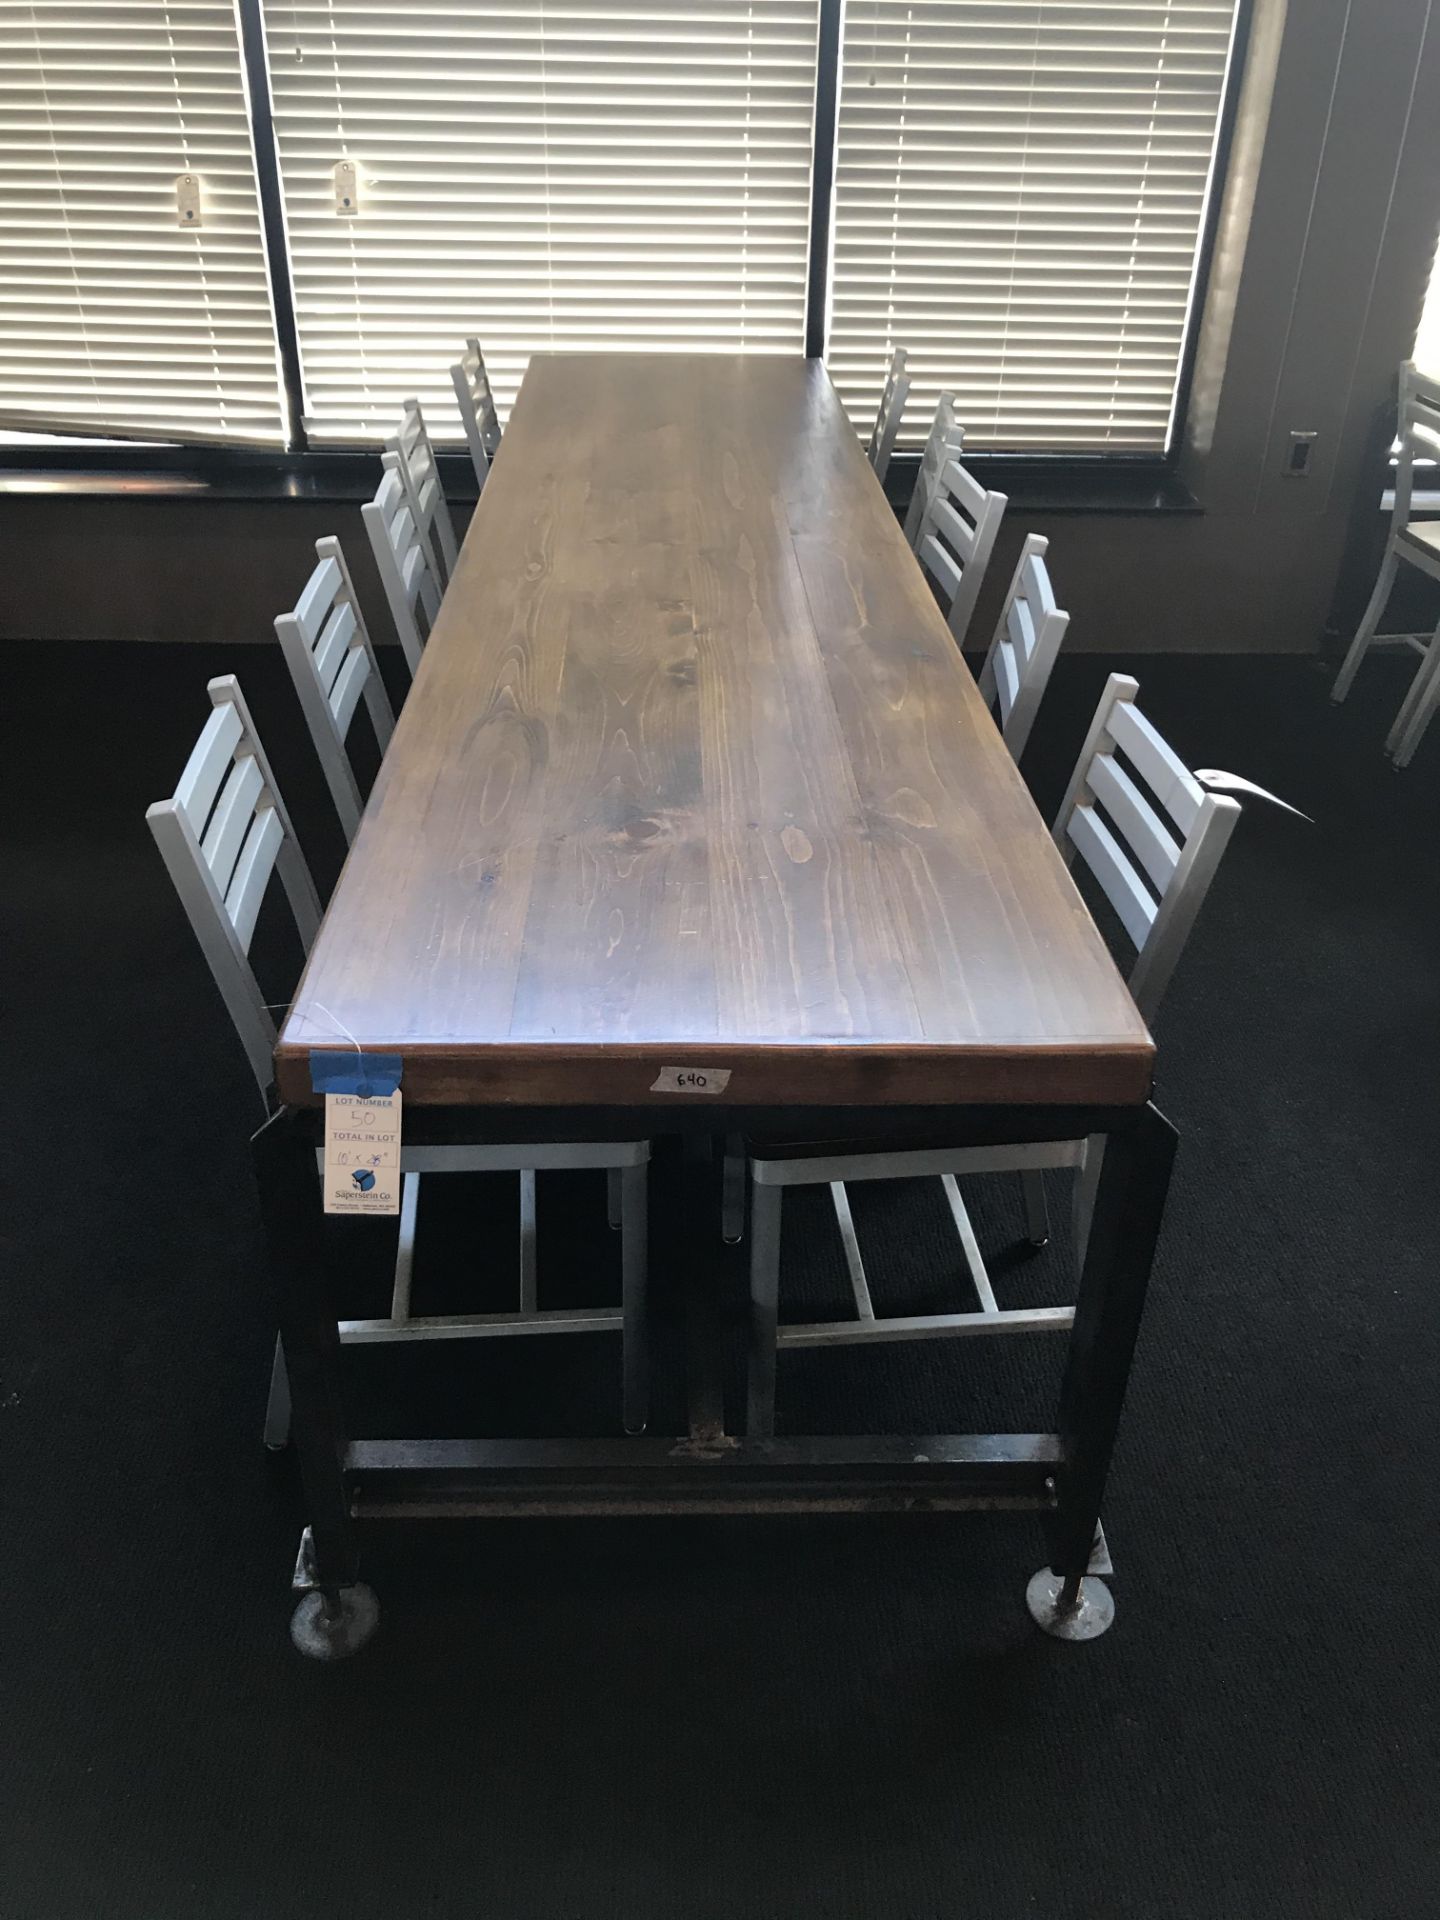 10' x 28" x 2 3/8" Thick Solid Wood Communal Table w/Steel Frame & Adjustable Height Feet